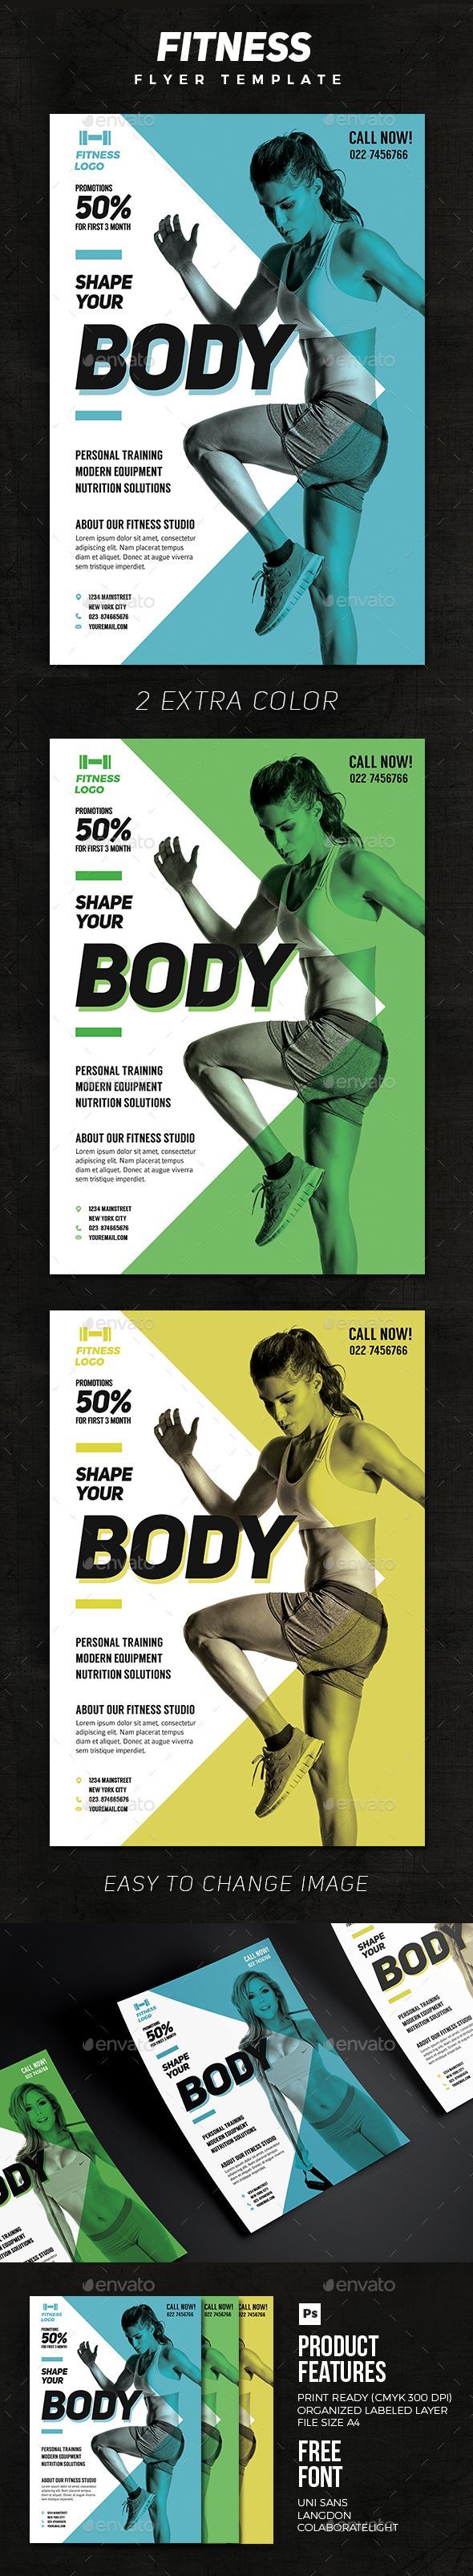 Healthcare-Advertising-Healthcare-Advertising-Fitness-Template-PSD-Template-Only-available-here Healthcare Advertising : Healthcare Advertising : Fitness Template   PSD Template  Only available here